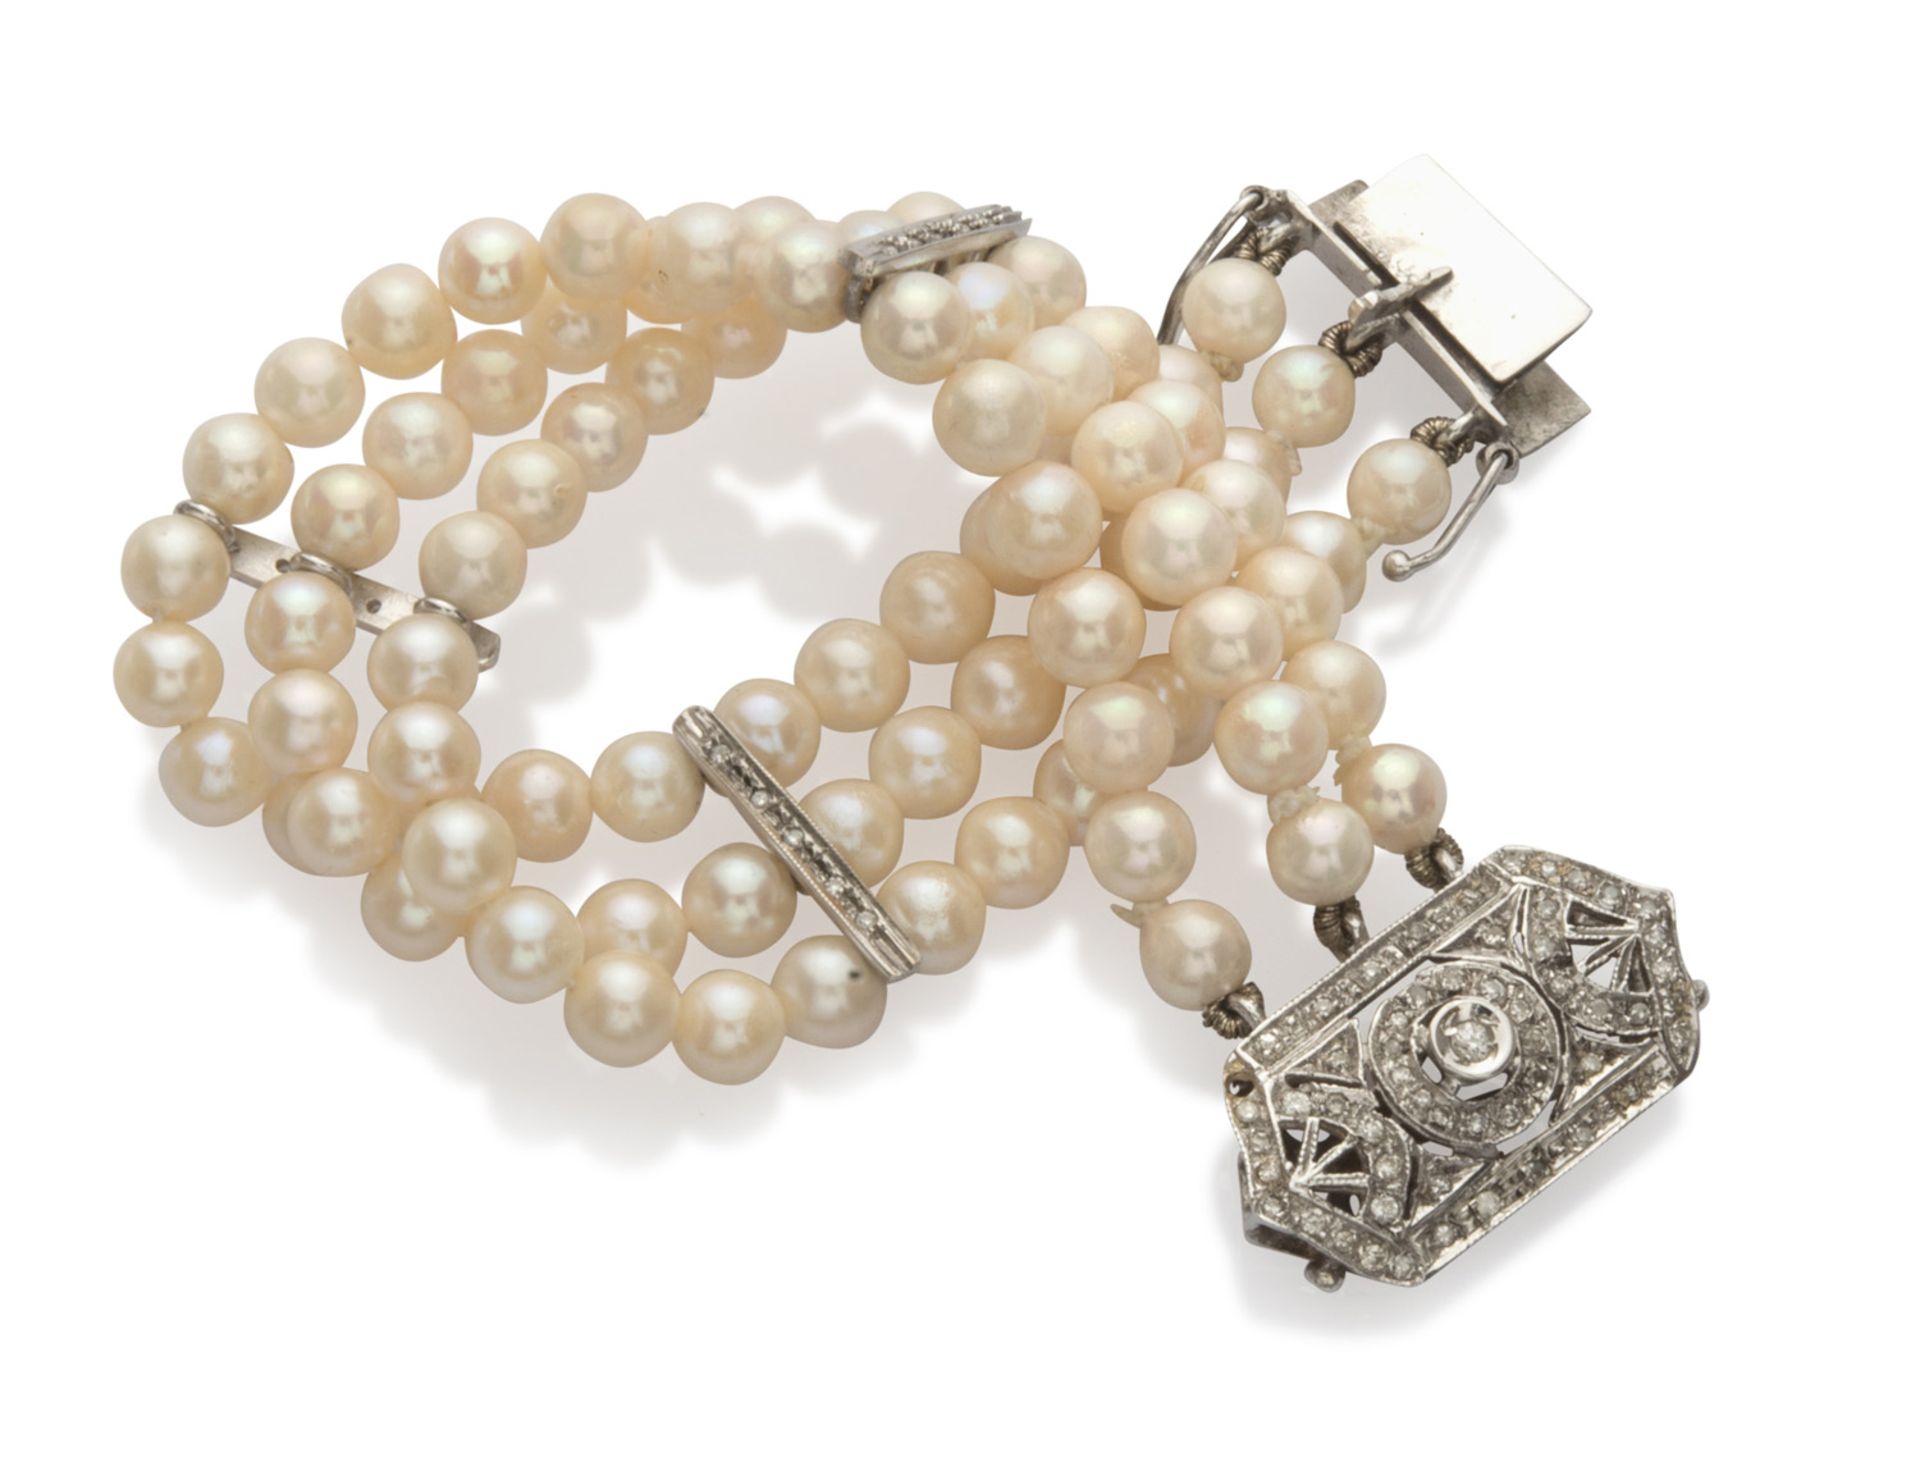 SPLENDID BRACELET band in white gold 18 kts., with three threads of pearls alternated with diamond